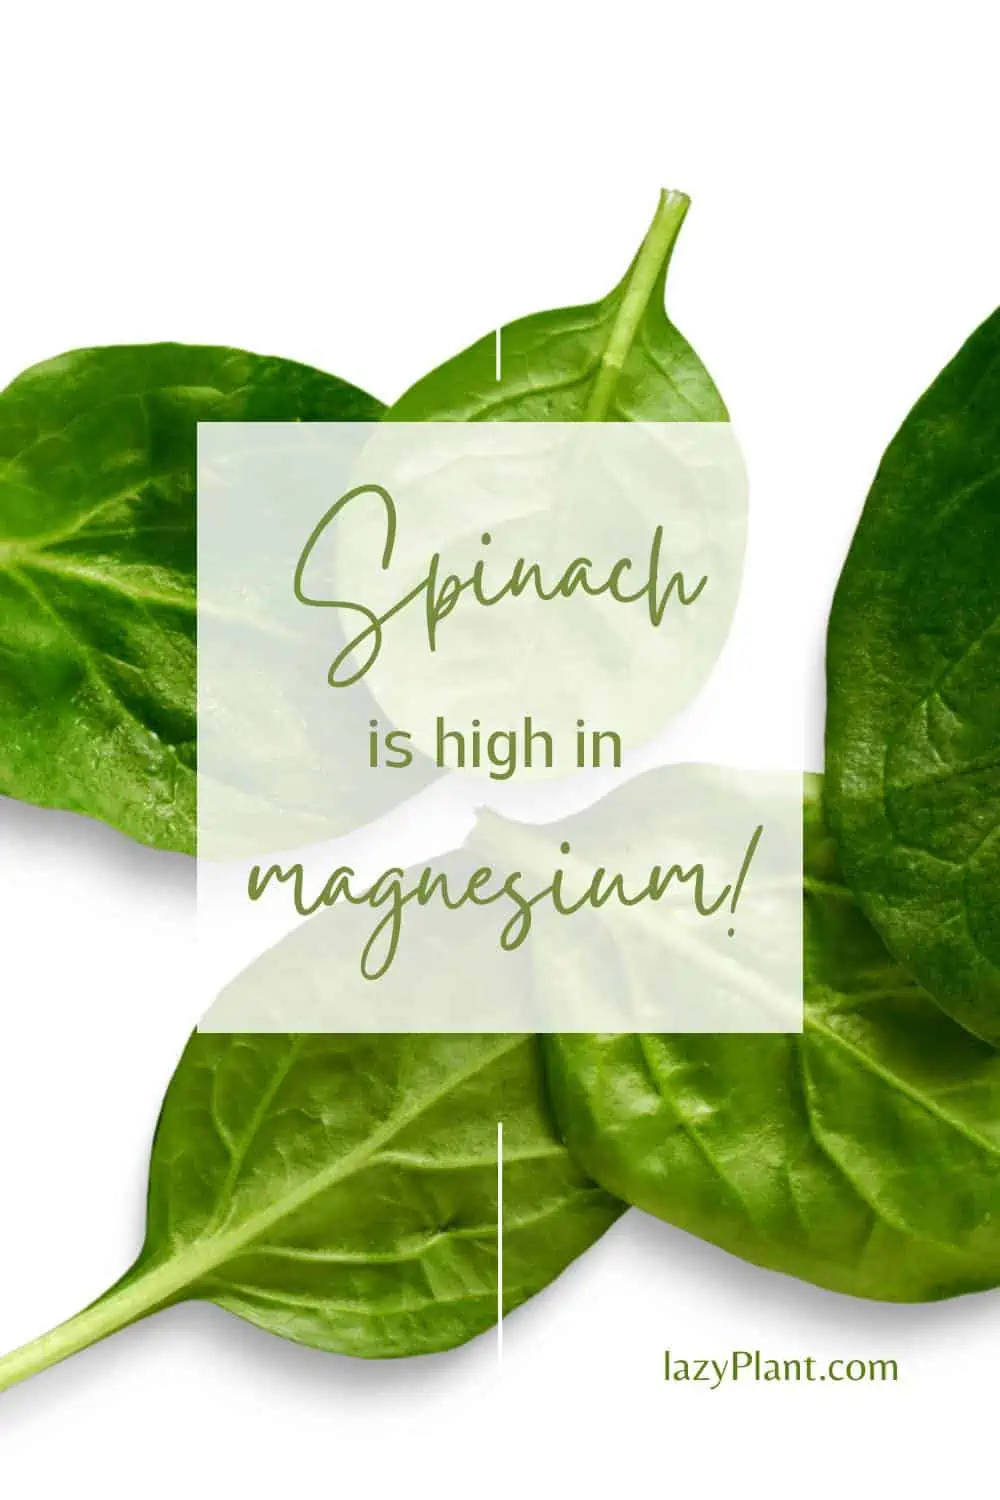 Spinach in one of the best vegan sources of magnesium!